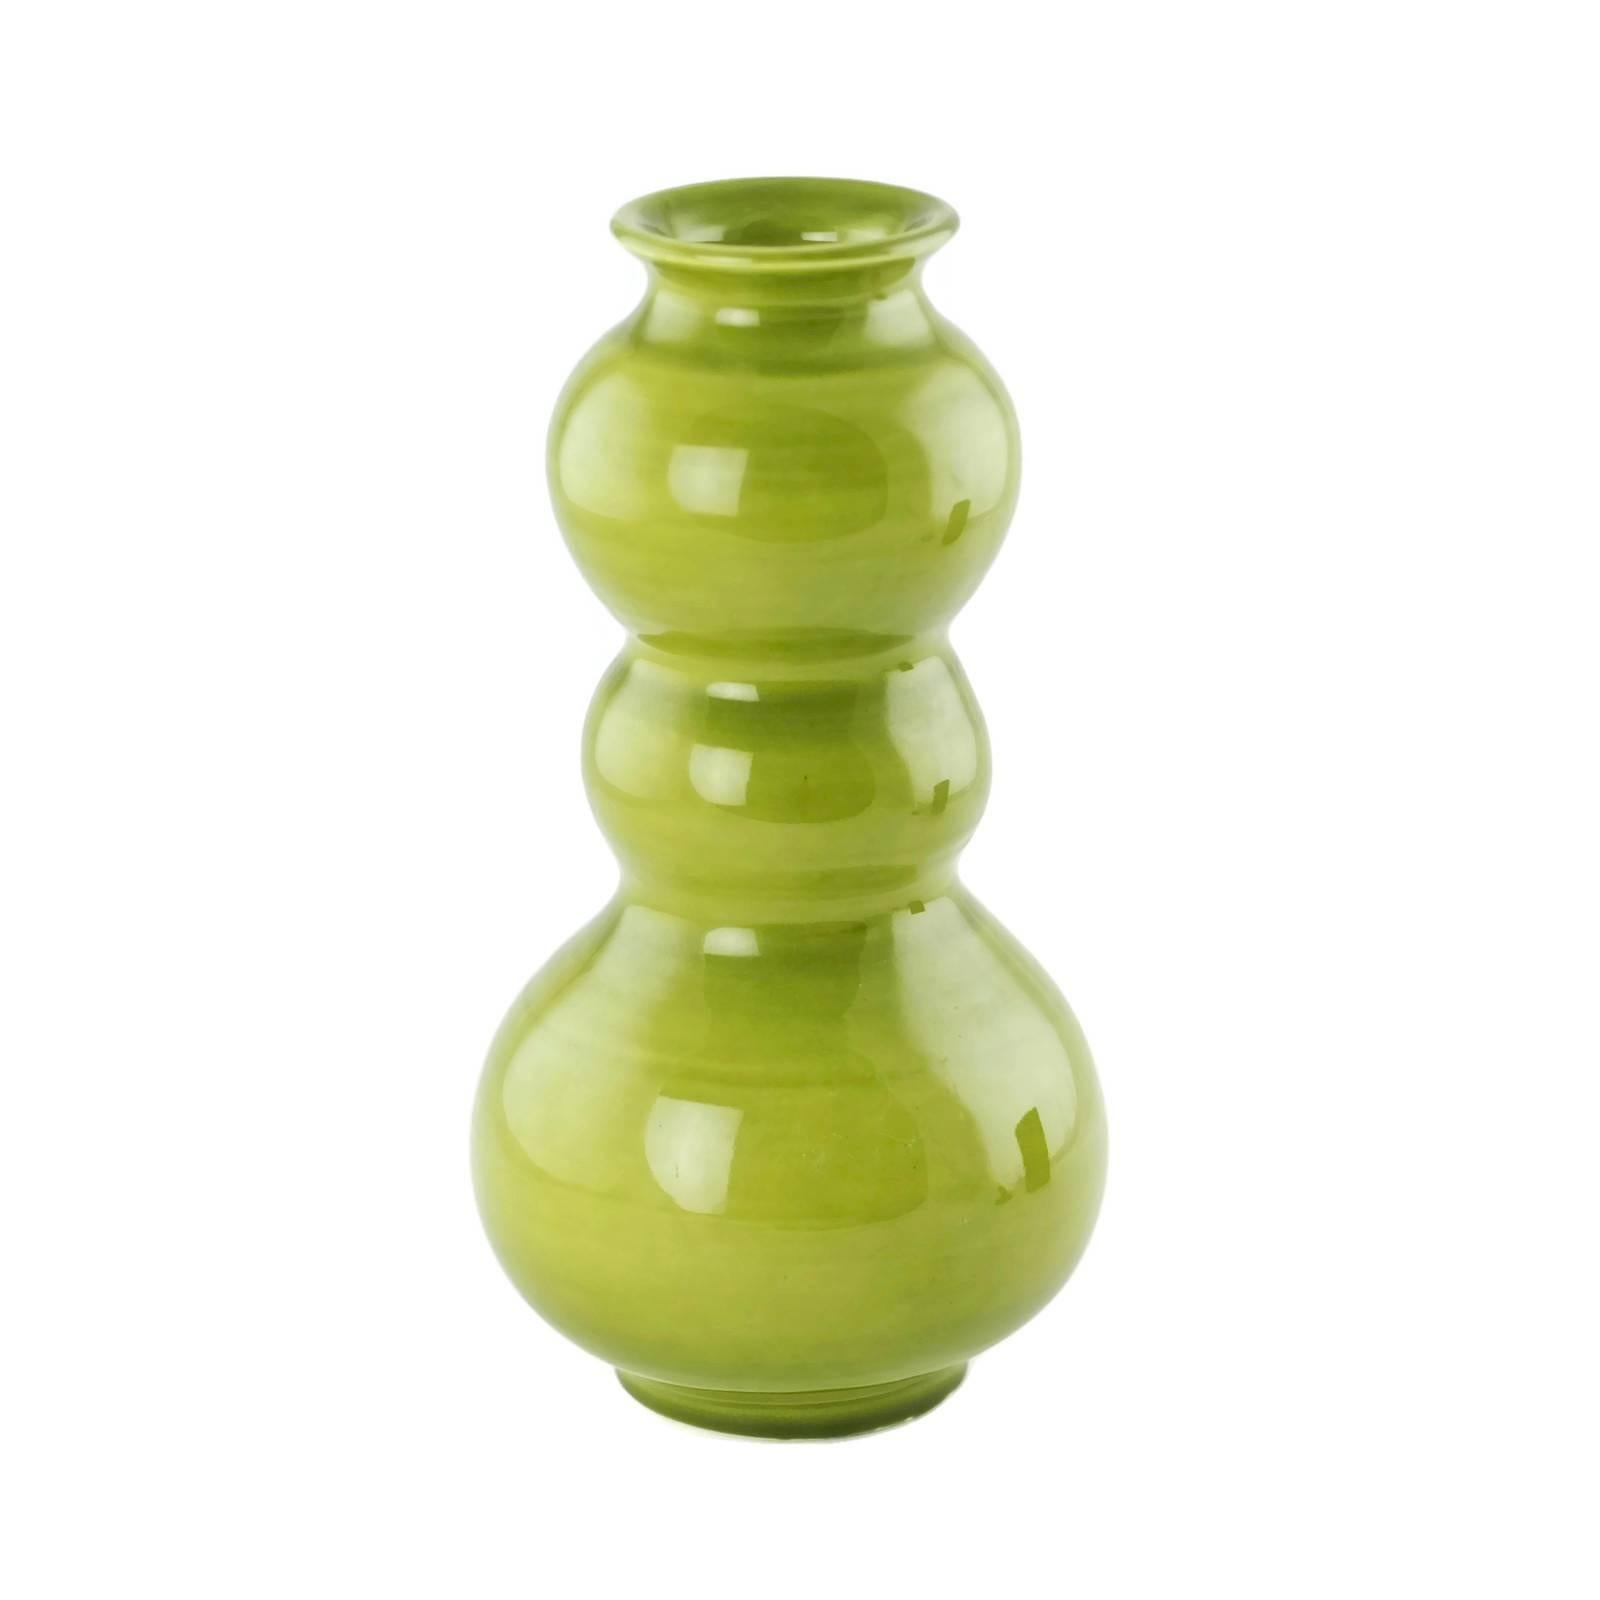 This striking ceramic vase is by noted Italian designer Alvino Bagni (1919-2000) and was made in Italy for American importer Raymor. The piece has a triple gourd form and is finished in a bright lime green glaze. The underside of the piece is signed